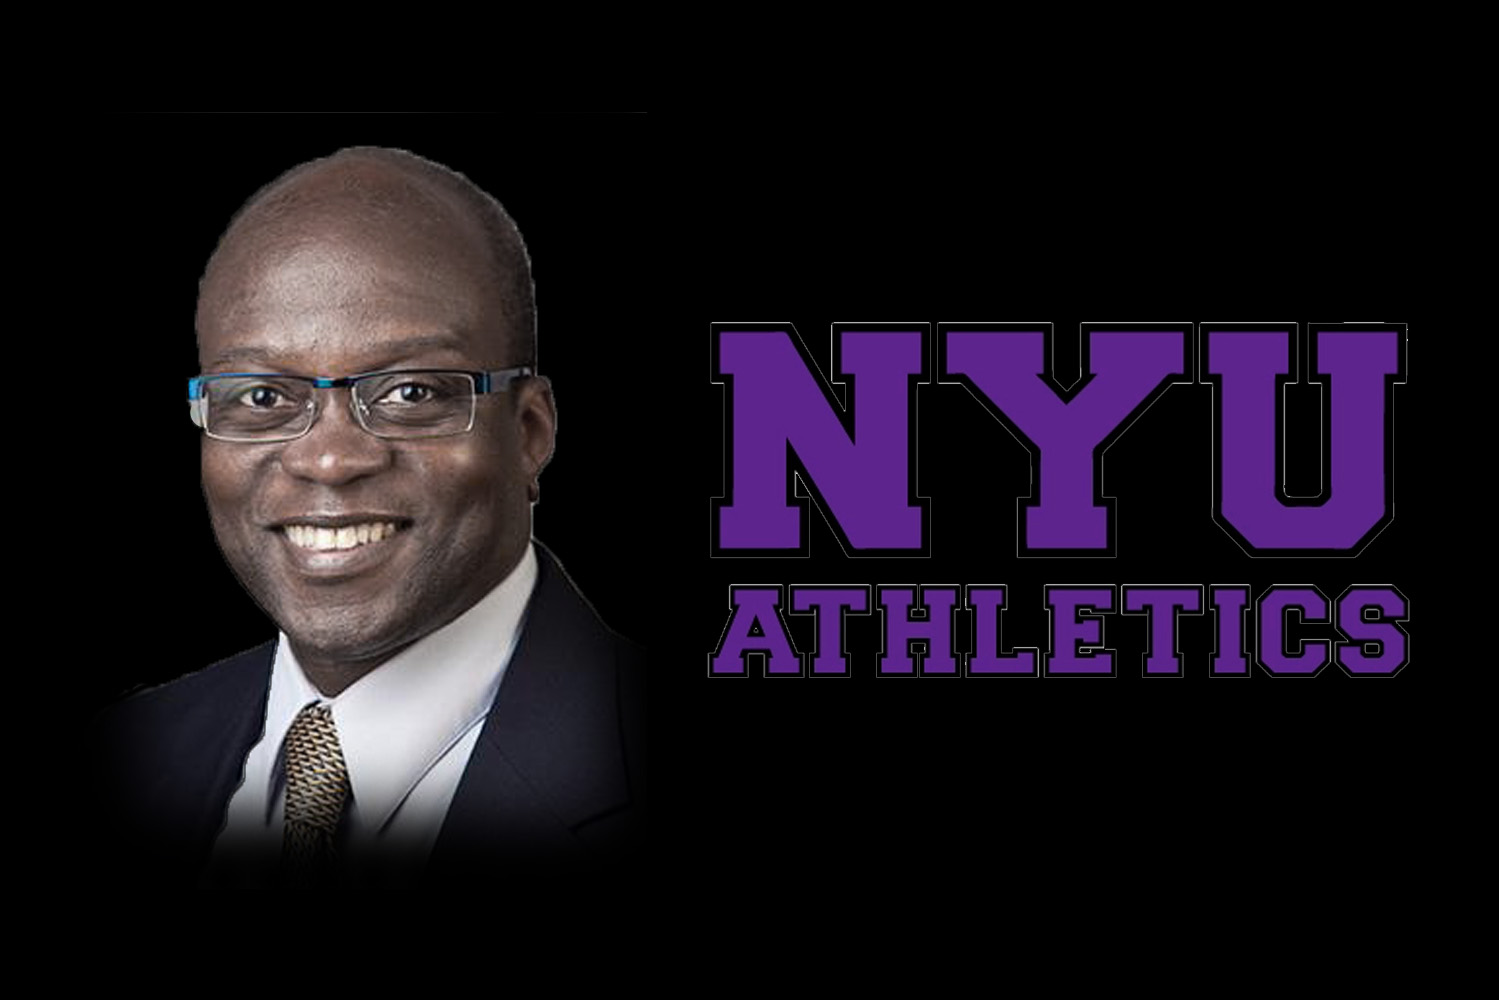 A man in formal attire on the left and a logo of N.Y.U. Athletics on the right.